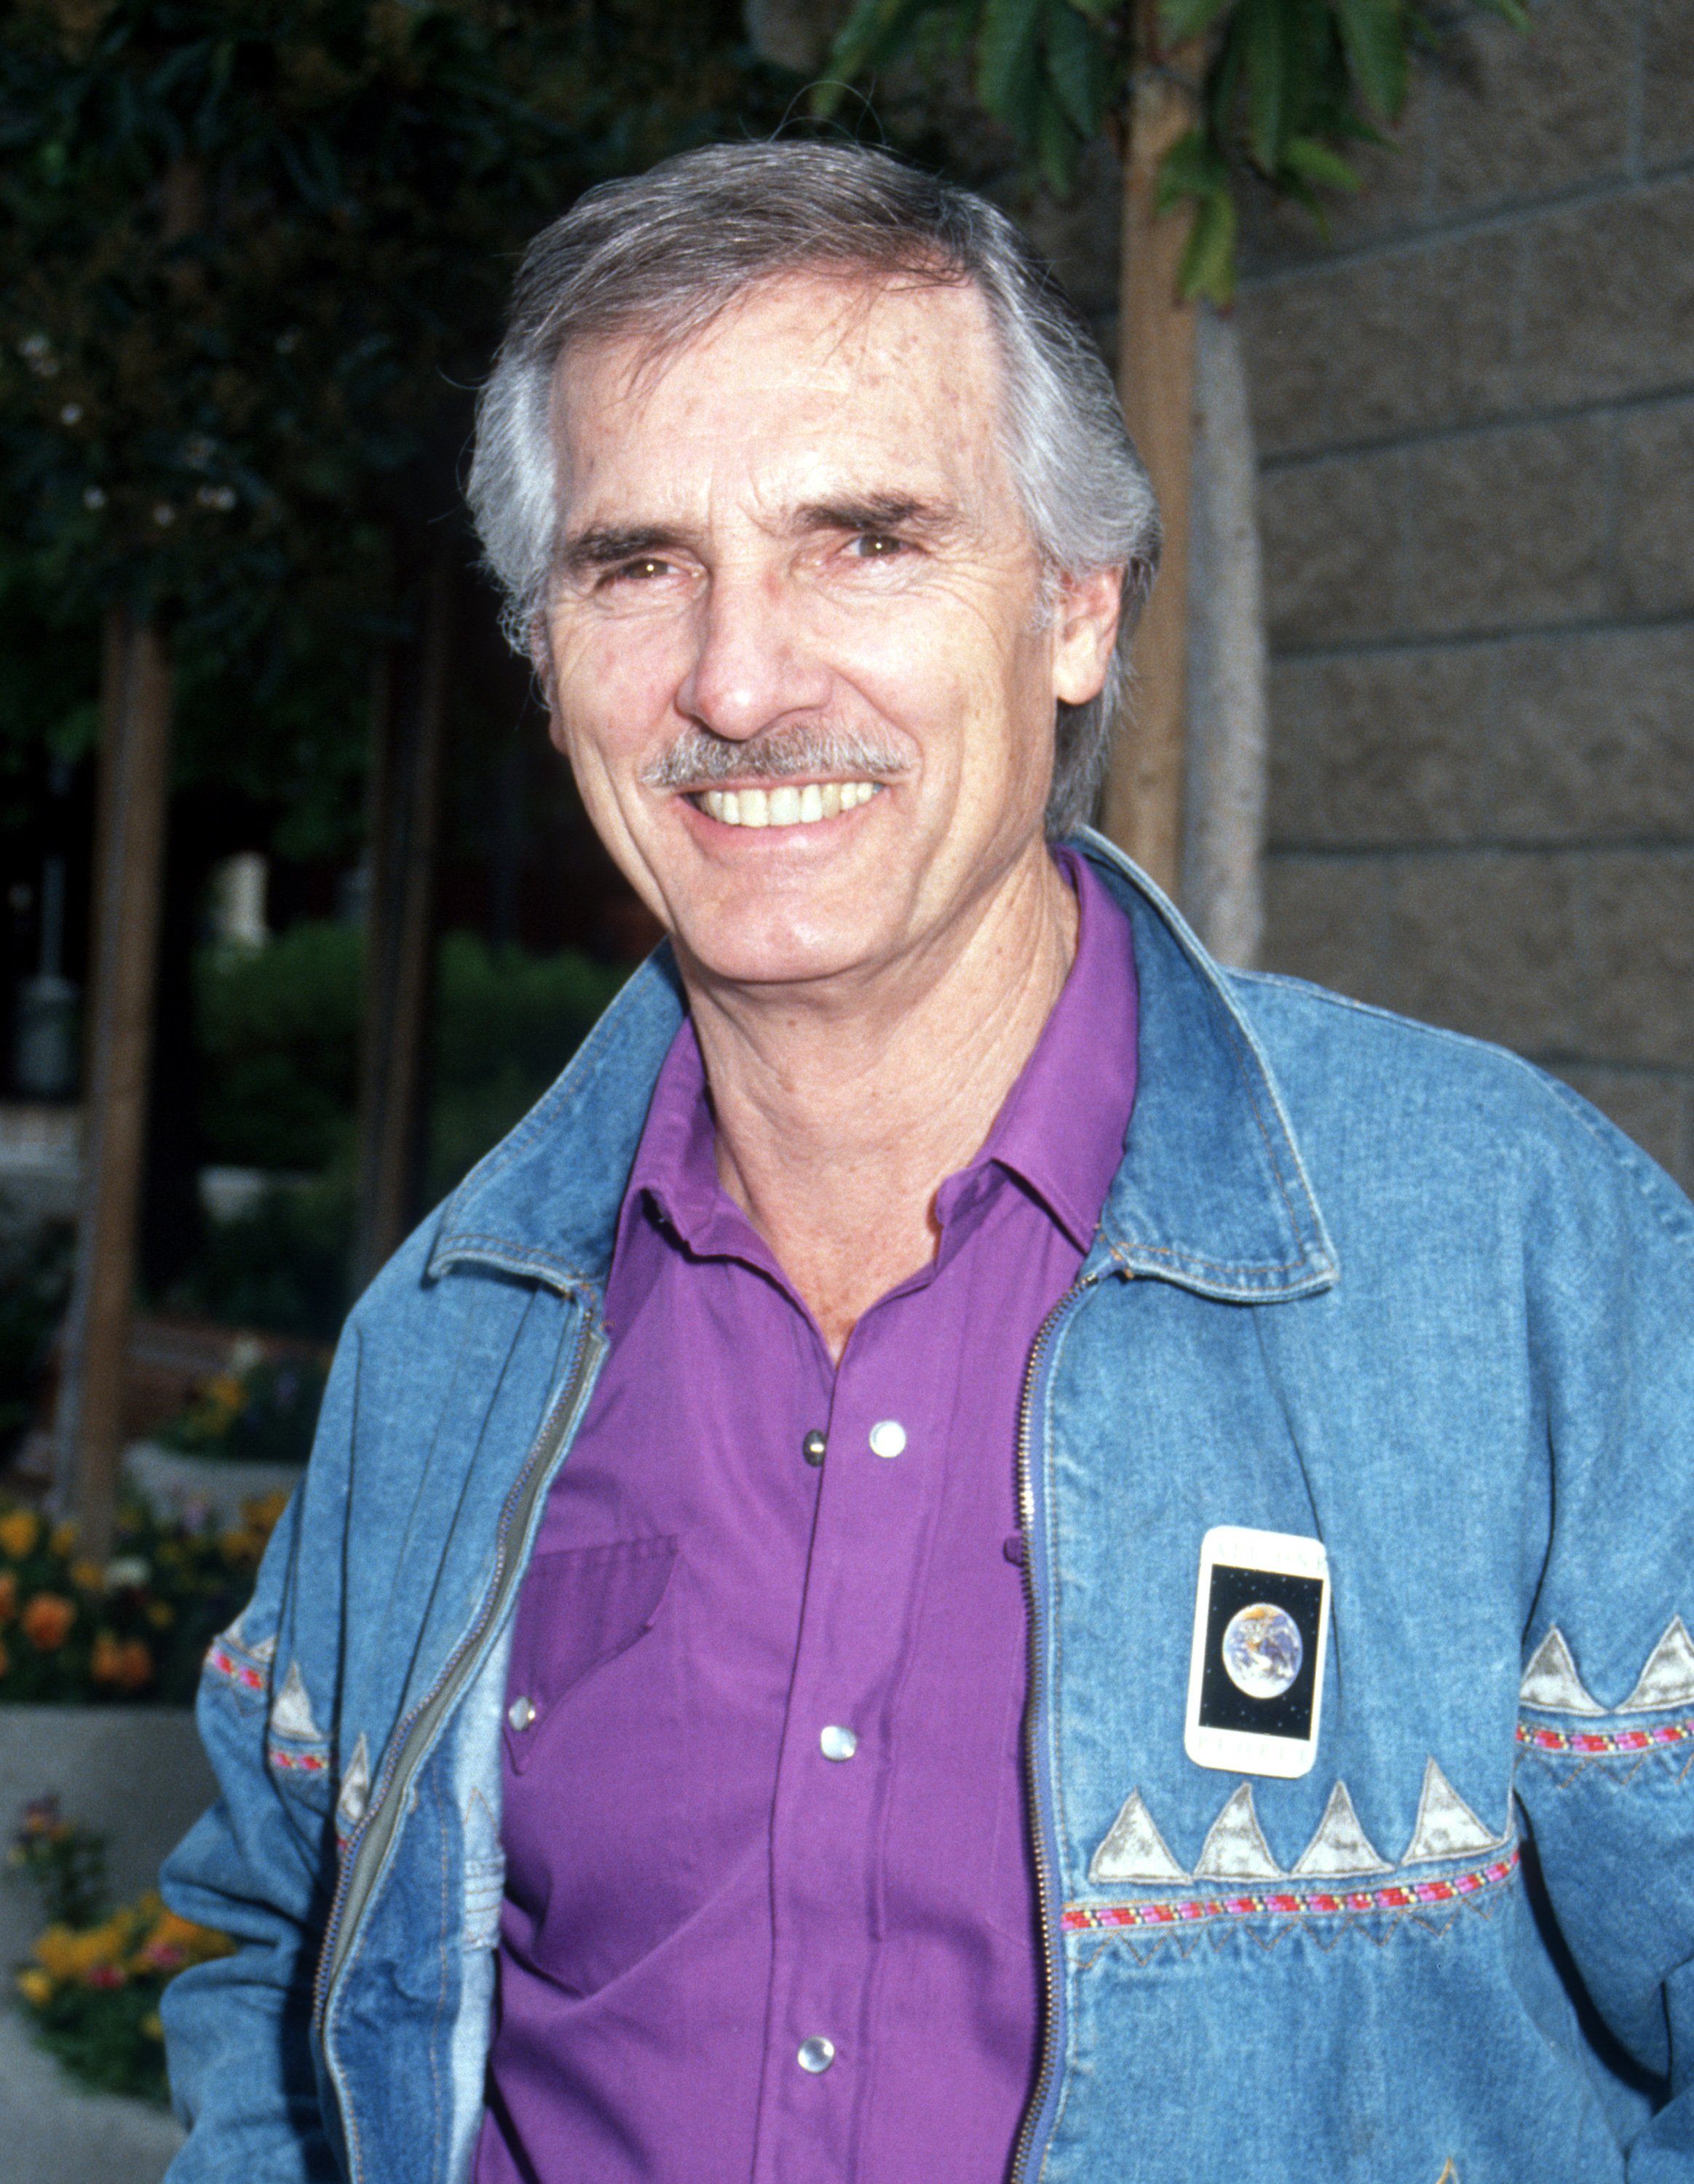 Dennis Weaver during 1991 ACMA Nominations Ceremony at Universal Studios in Universal City, California | Photo: Ron Galella, Ltd./Ron Galella Collection via Getty Images